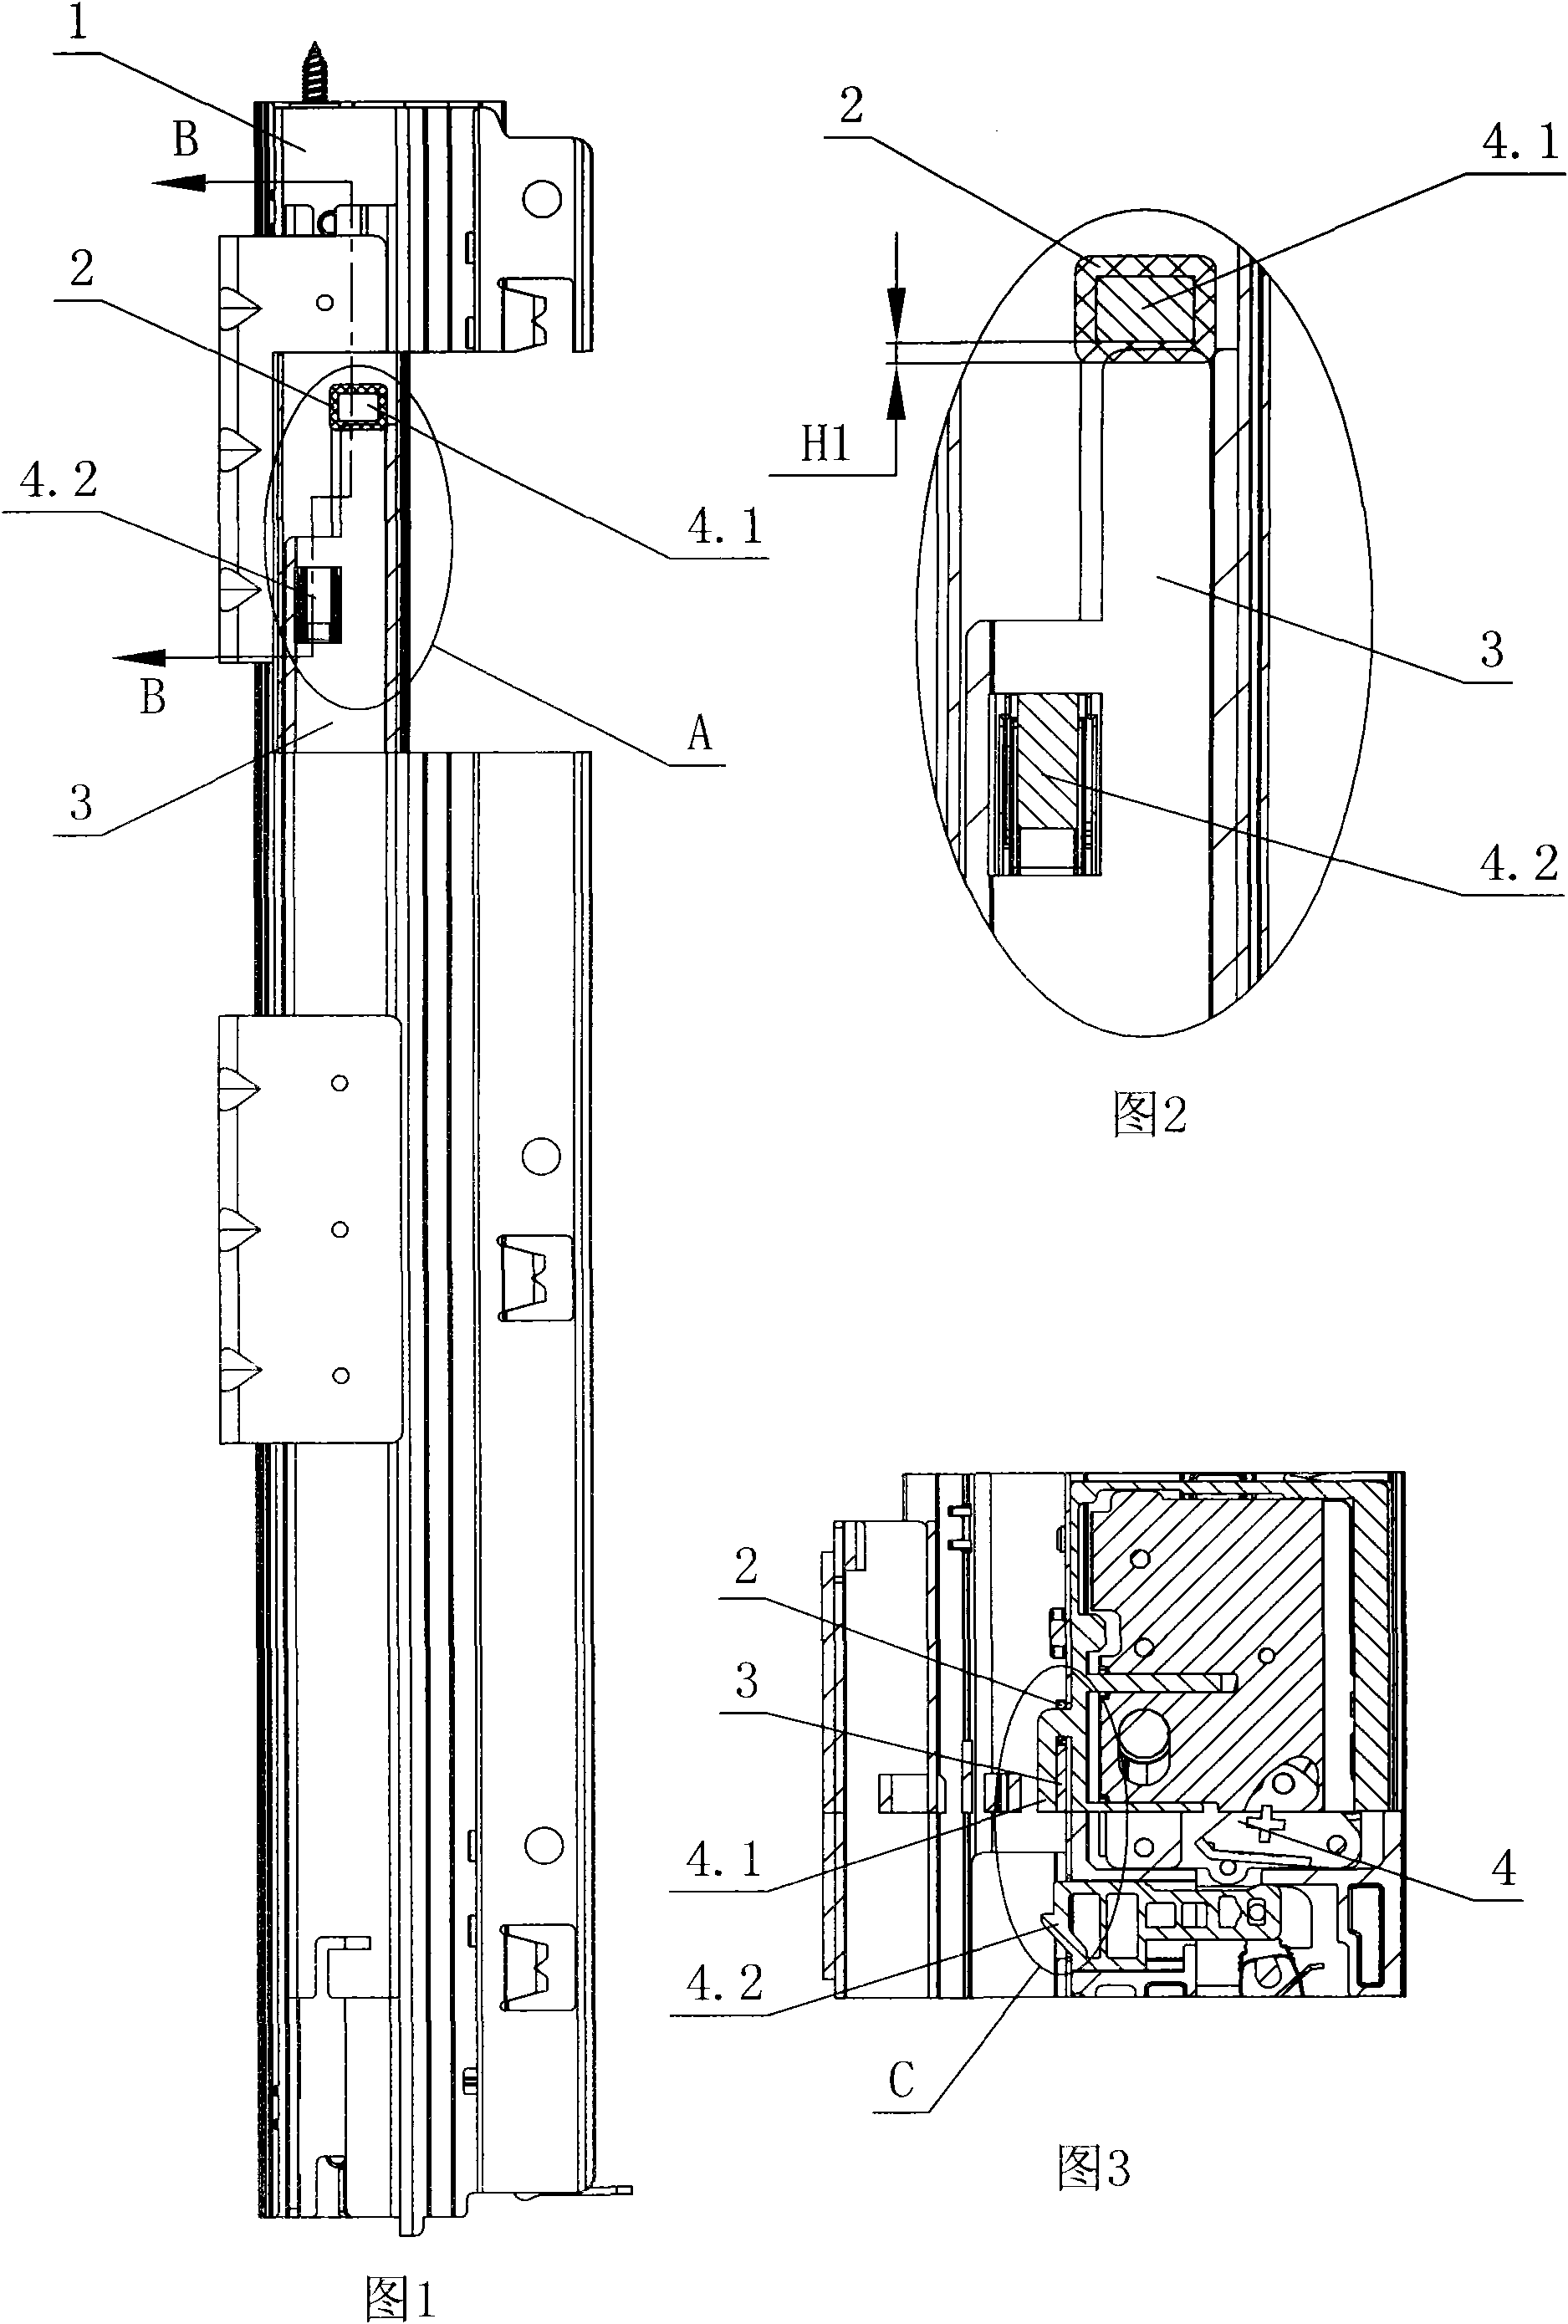 Slide linkage structure for drawers